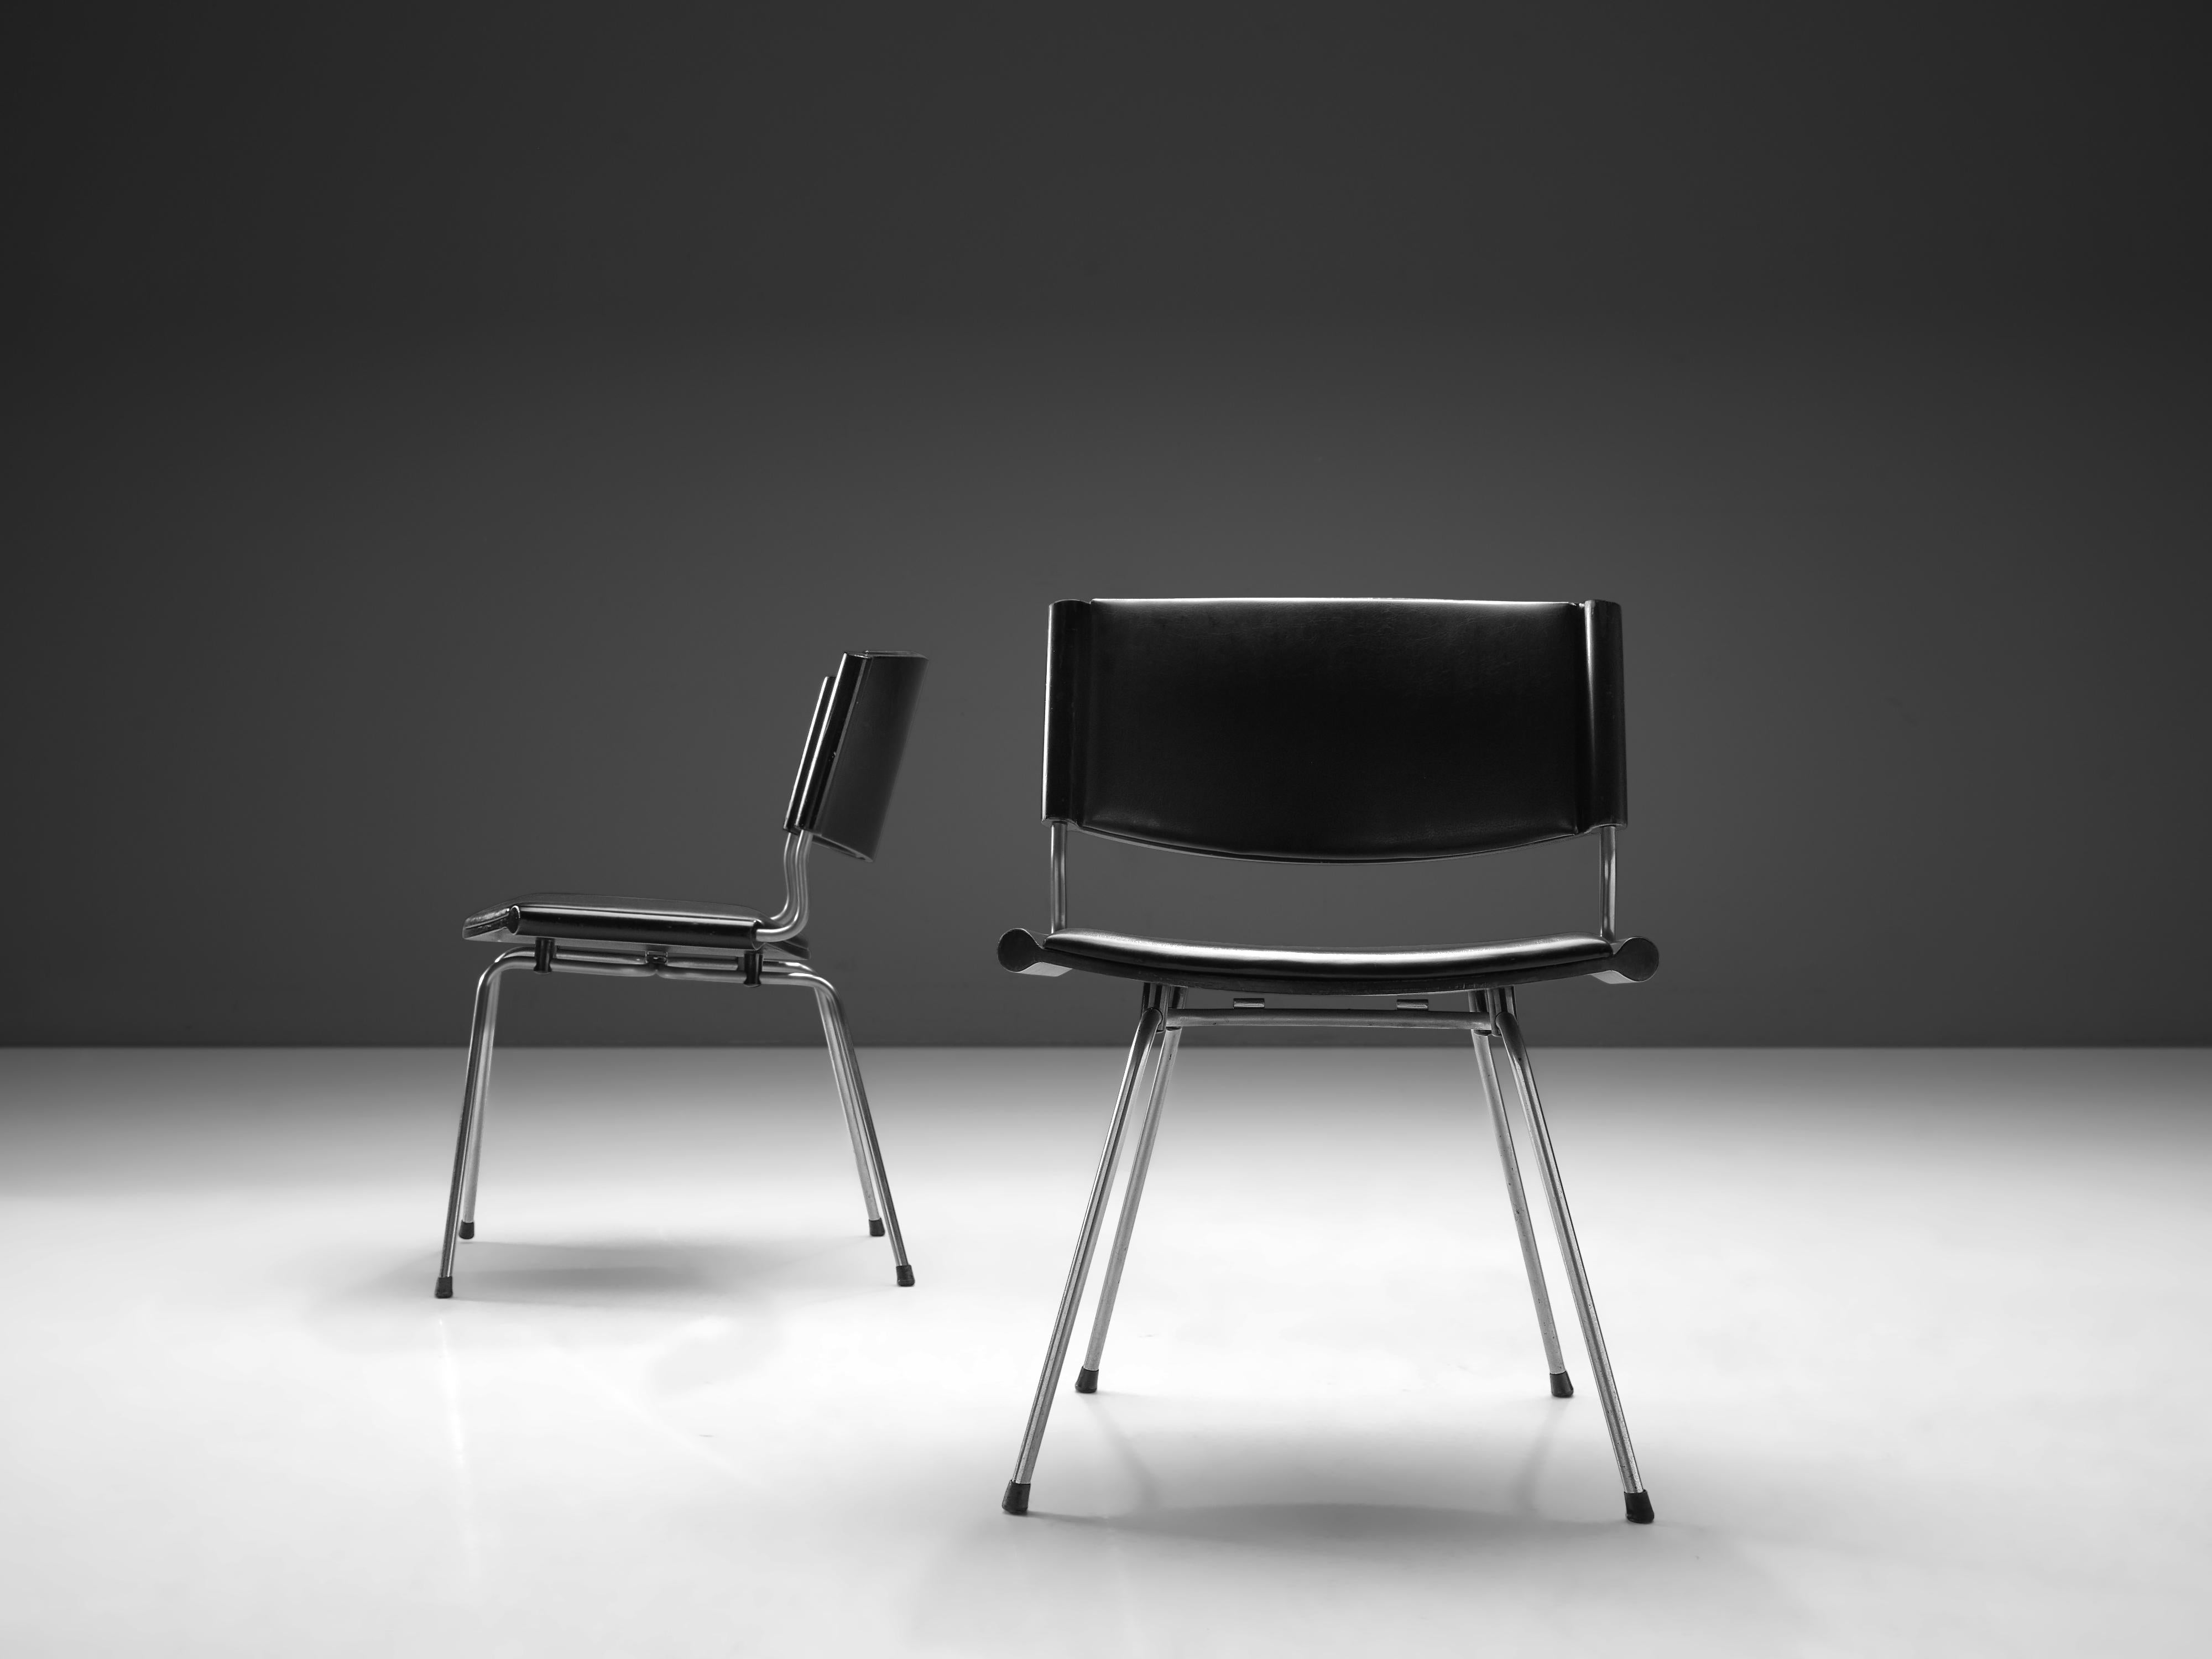 Nanna and Jørgen Ditzel Set of Four 'Badminton' Chair in Black Leather